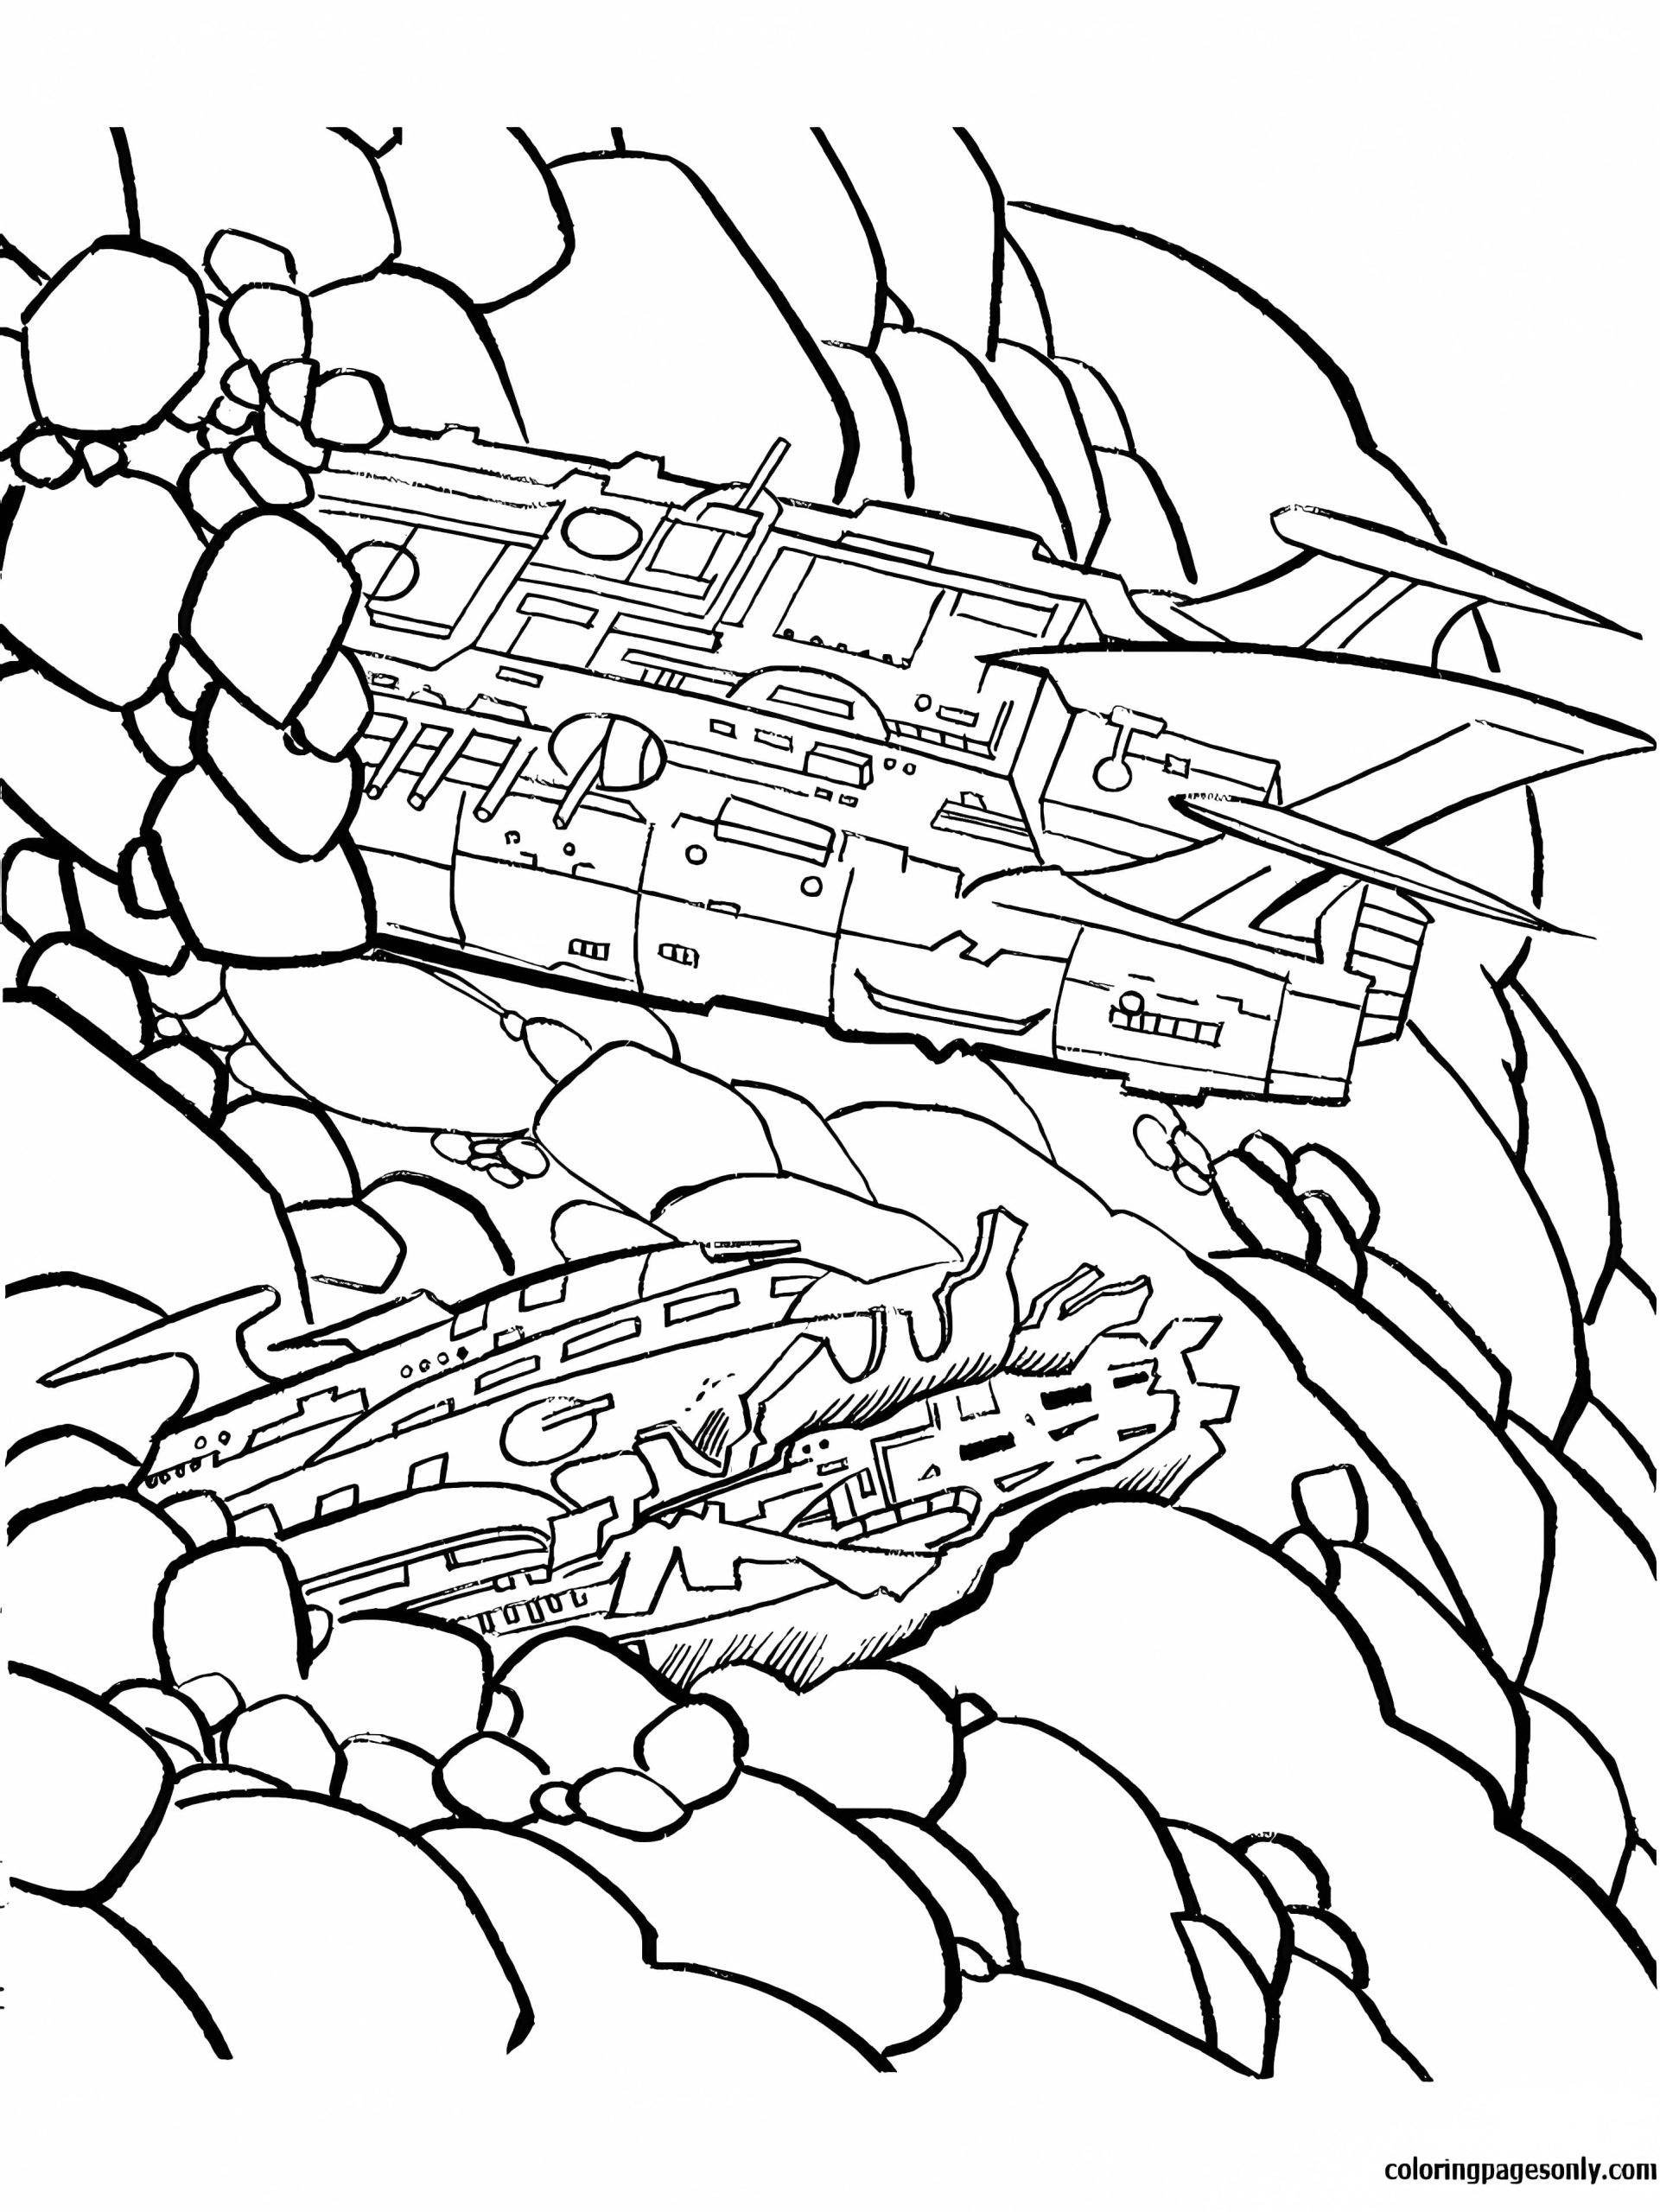 Transformers Machine Coloring Pages